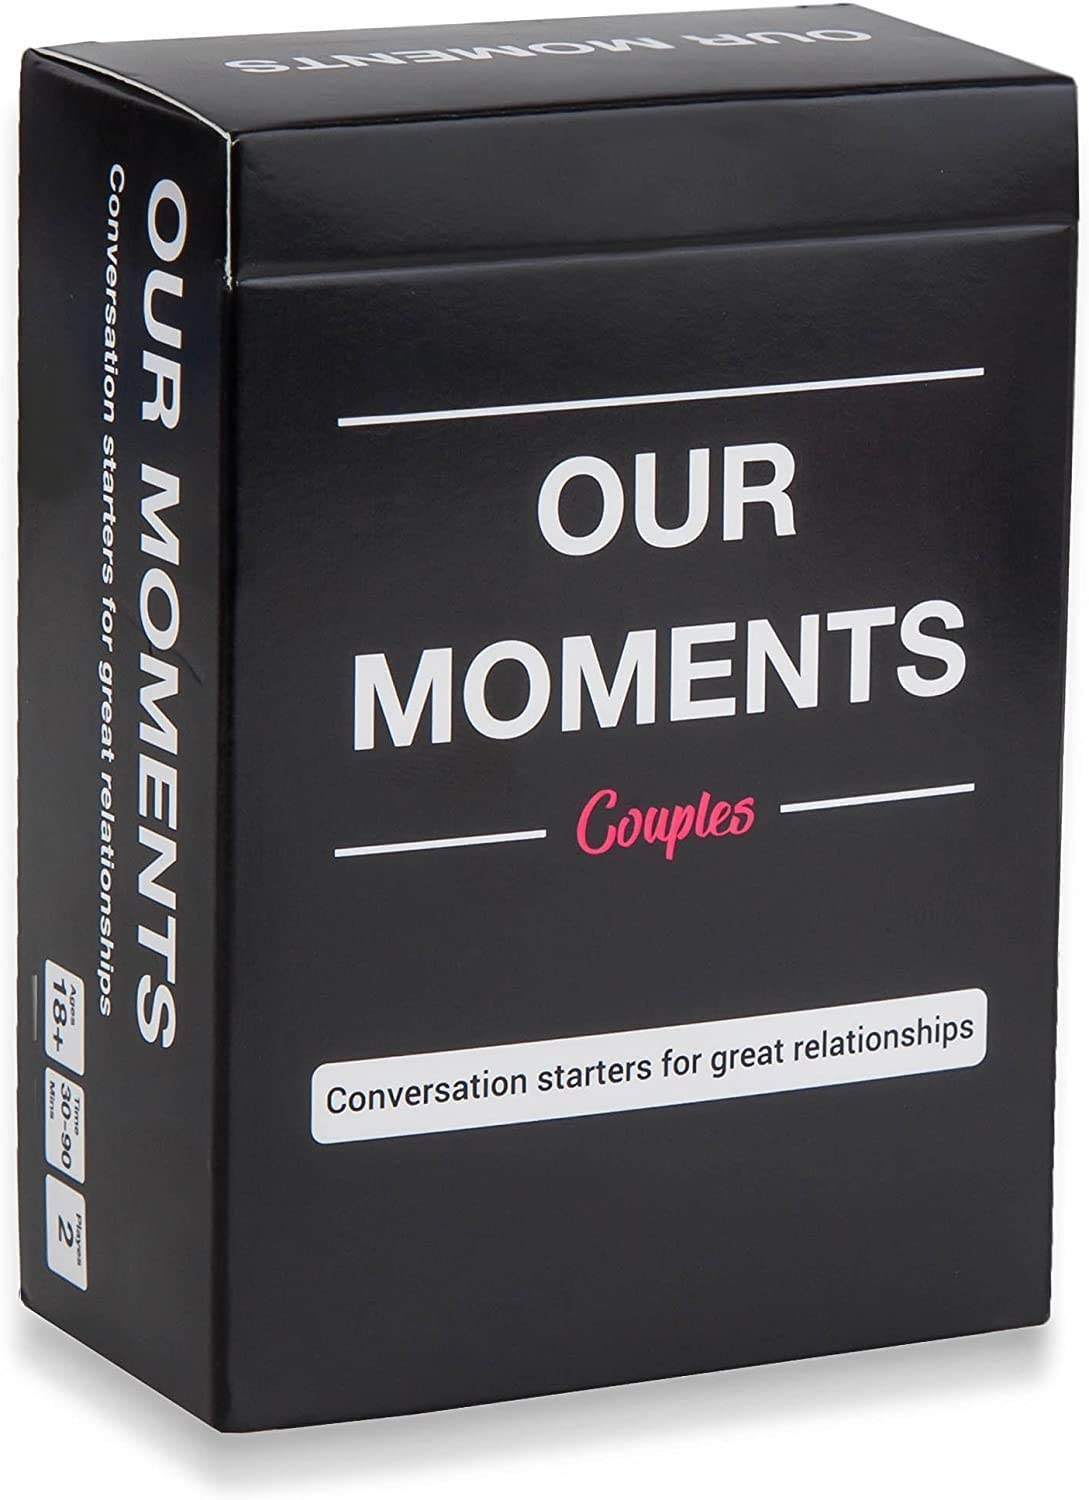 Our Moments (Couples)